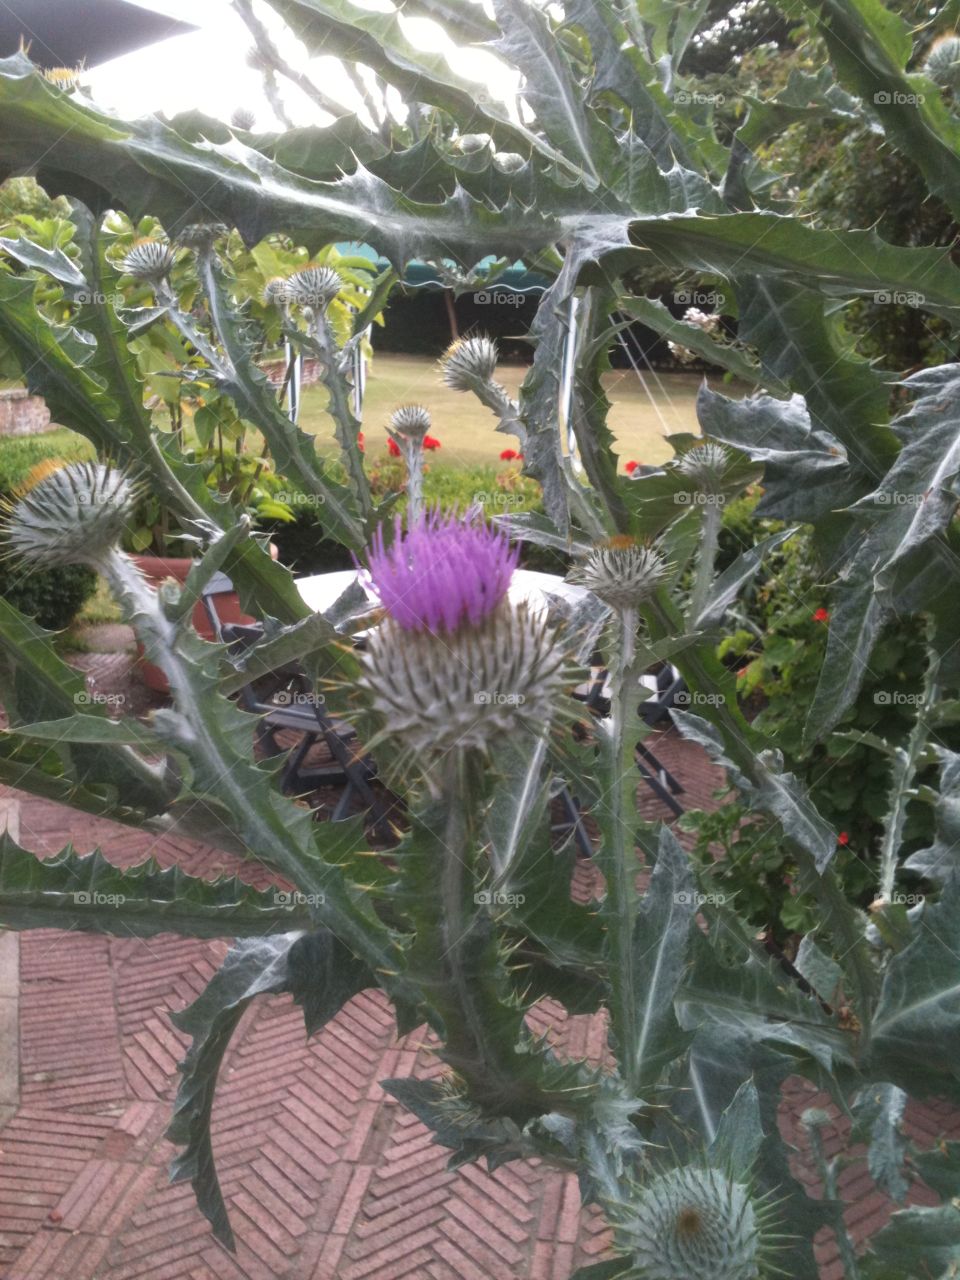 Thistle time